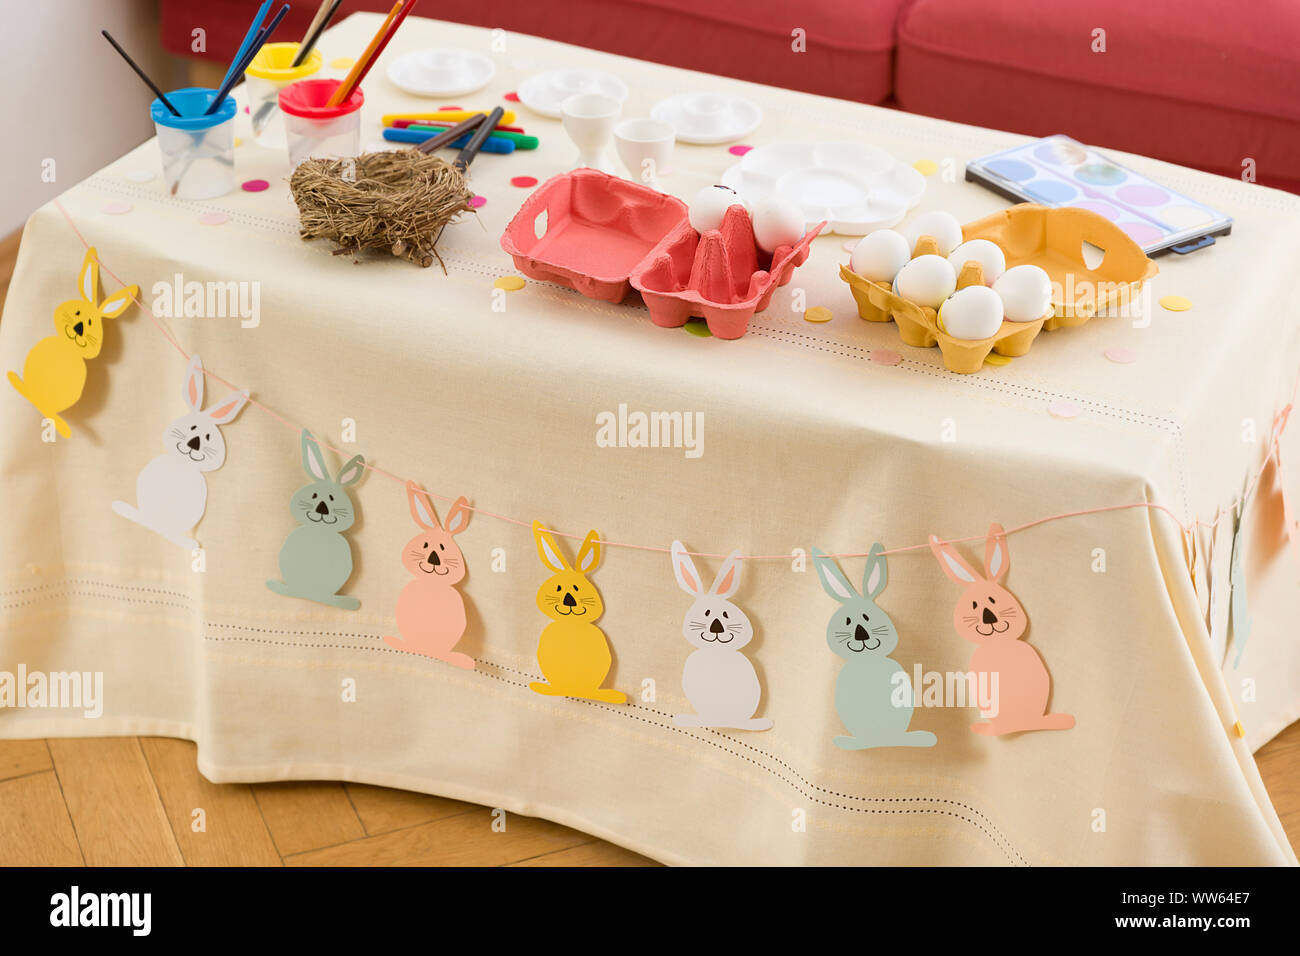 Coffee table, dyeing Easter eggs, accessories, paint, eggs, Egg carton Stock Photo